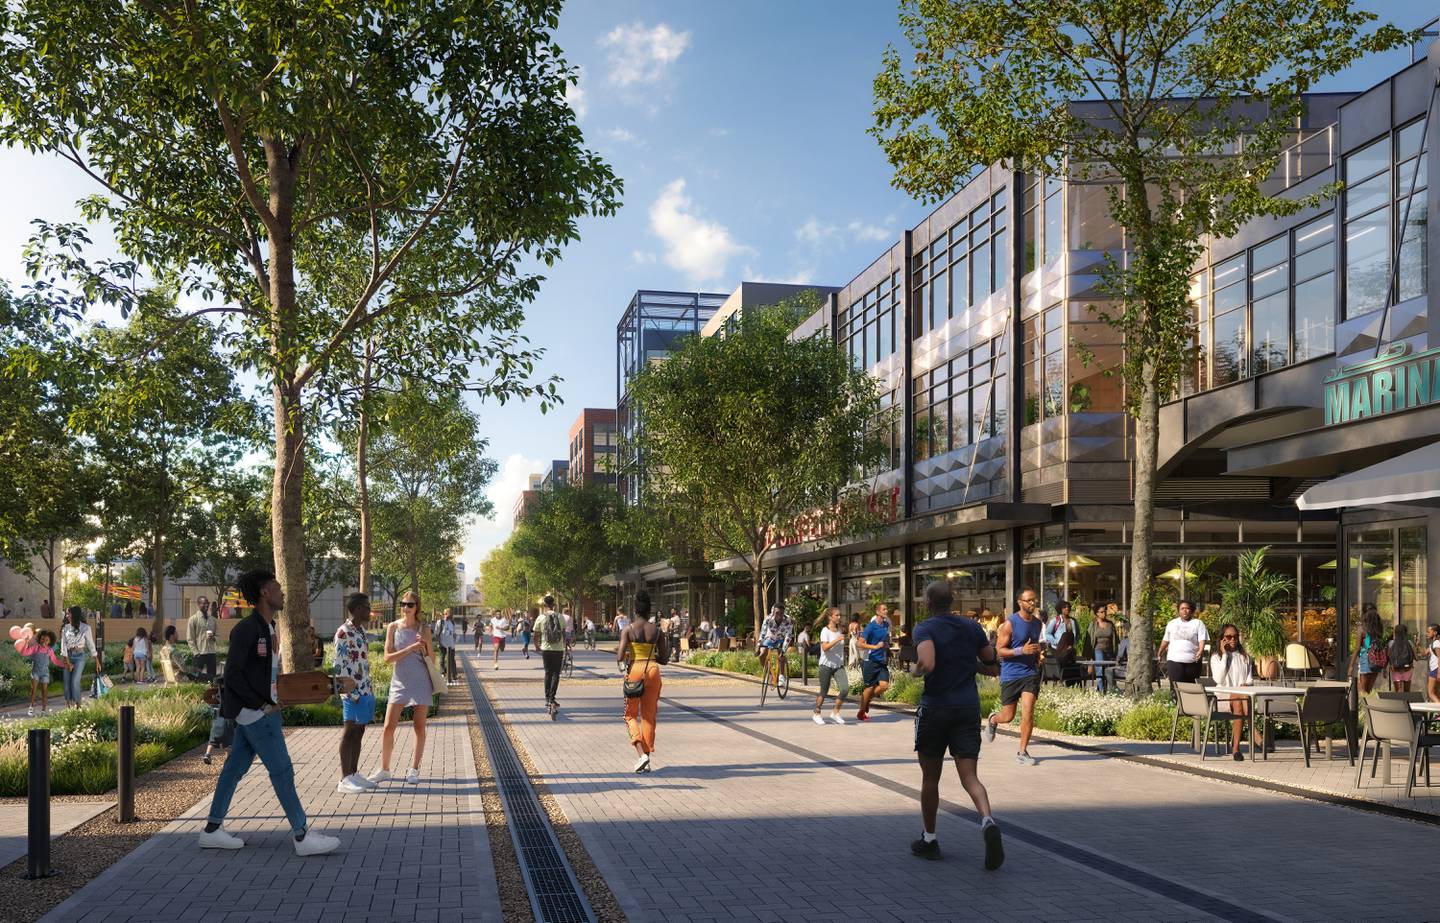 Digital rendering shows hypothetical view of new development, with people walking, running and sitting on wide sidewalk next to new glass building.